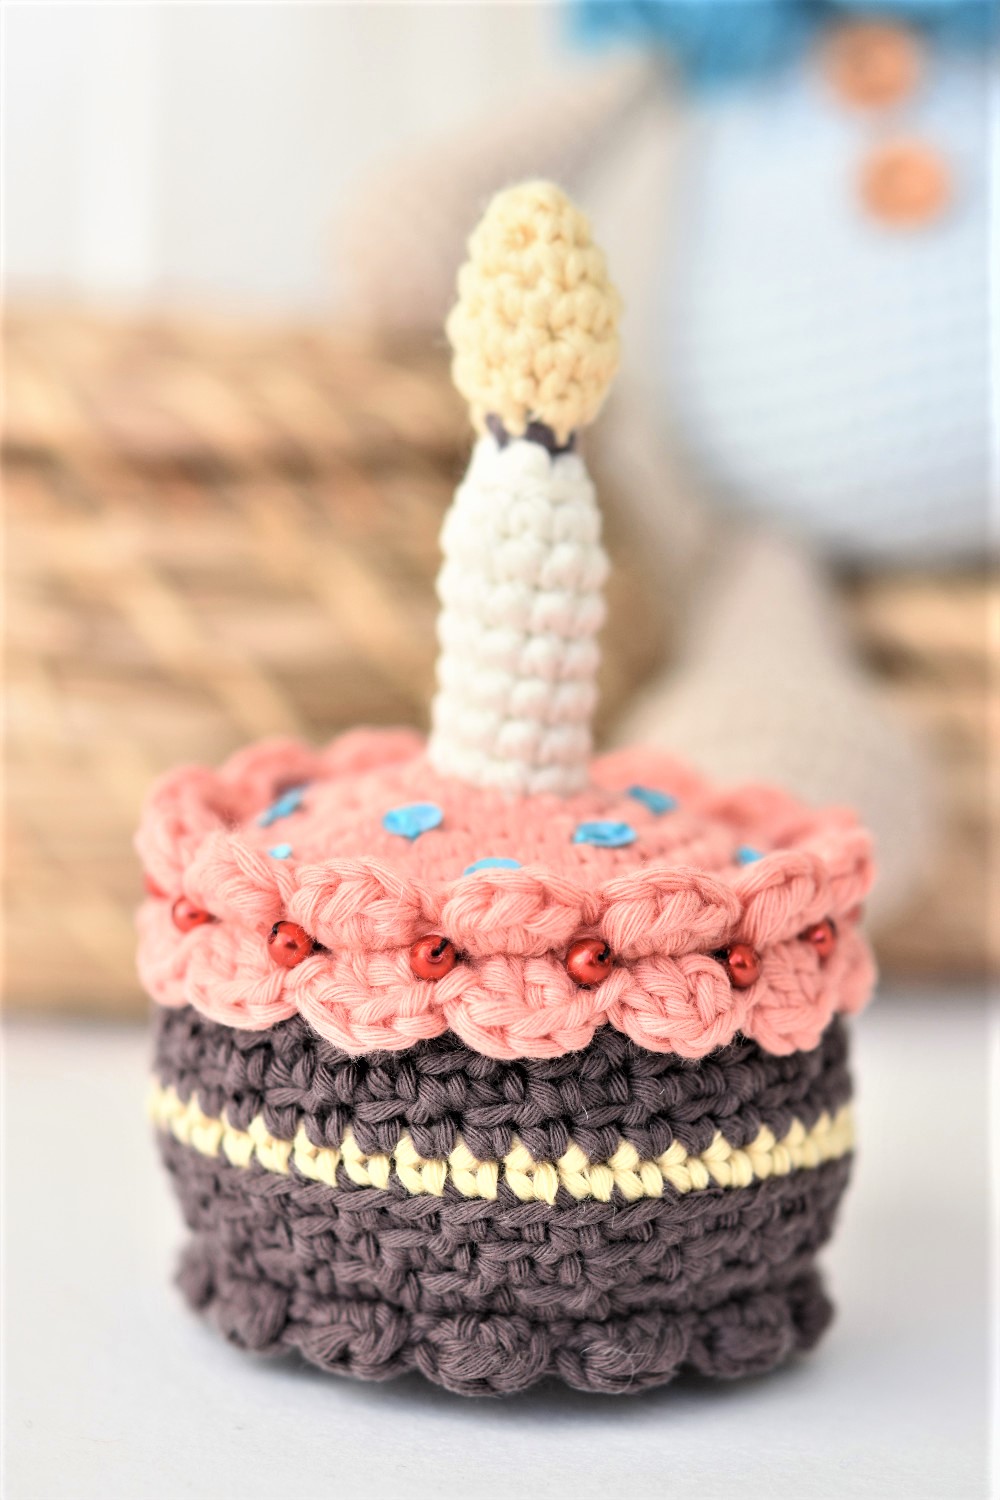 Sprinkles the Funfetti Cake Slice - A Menagerie of Stitches